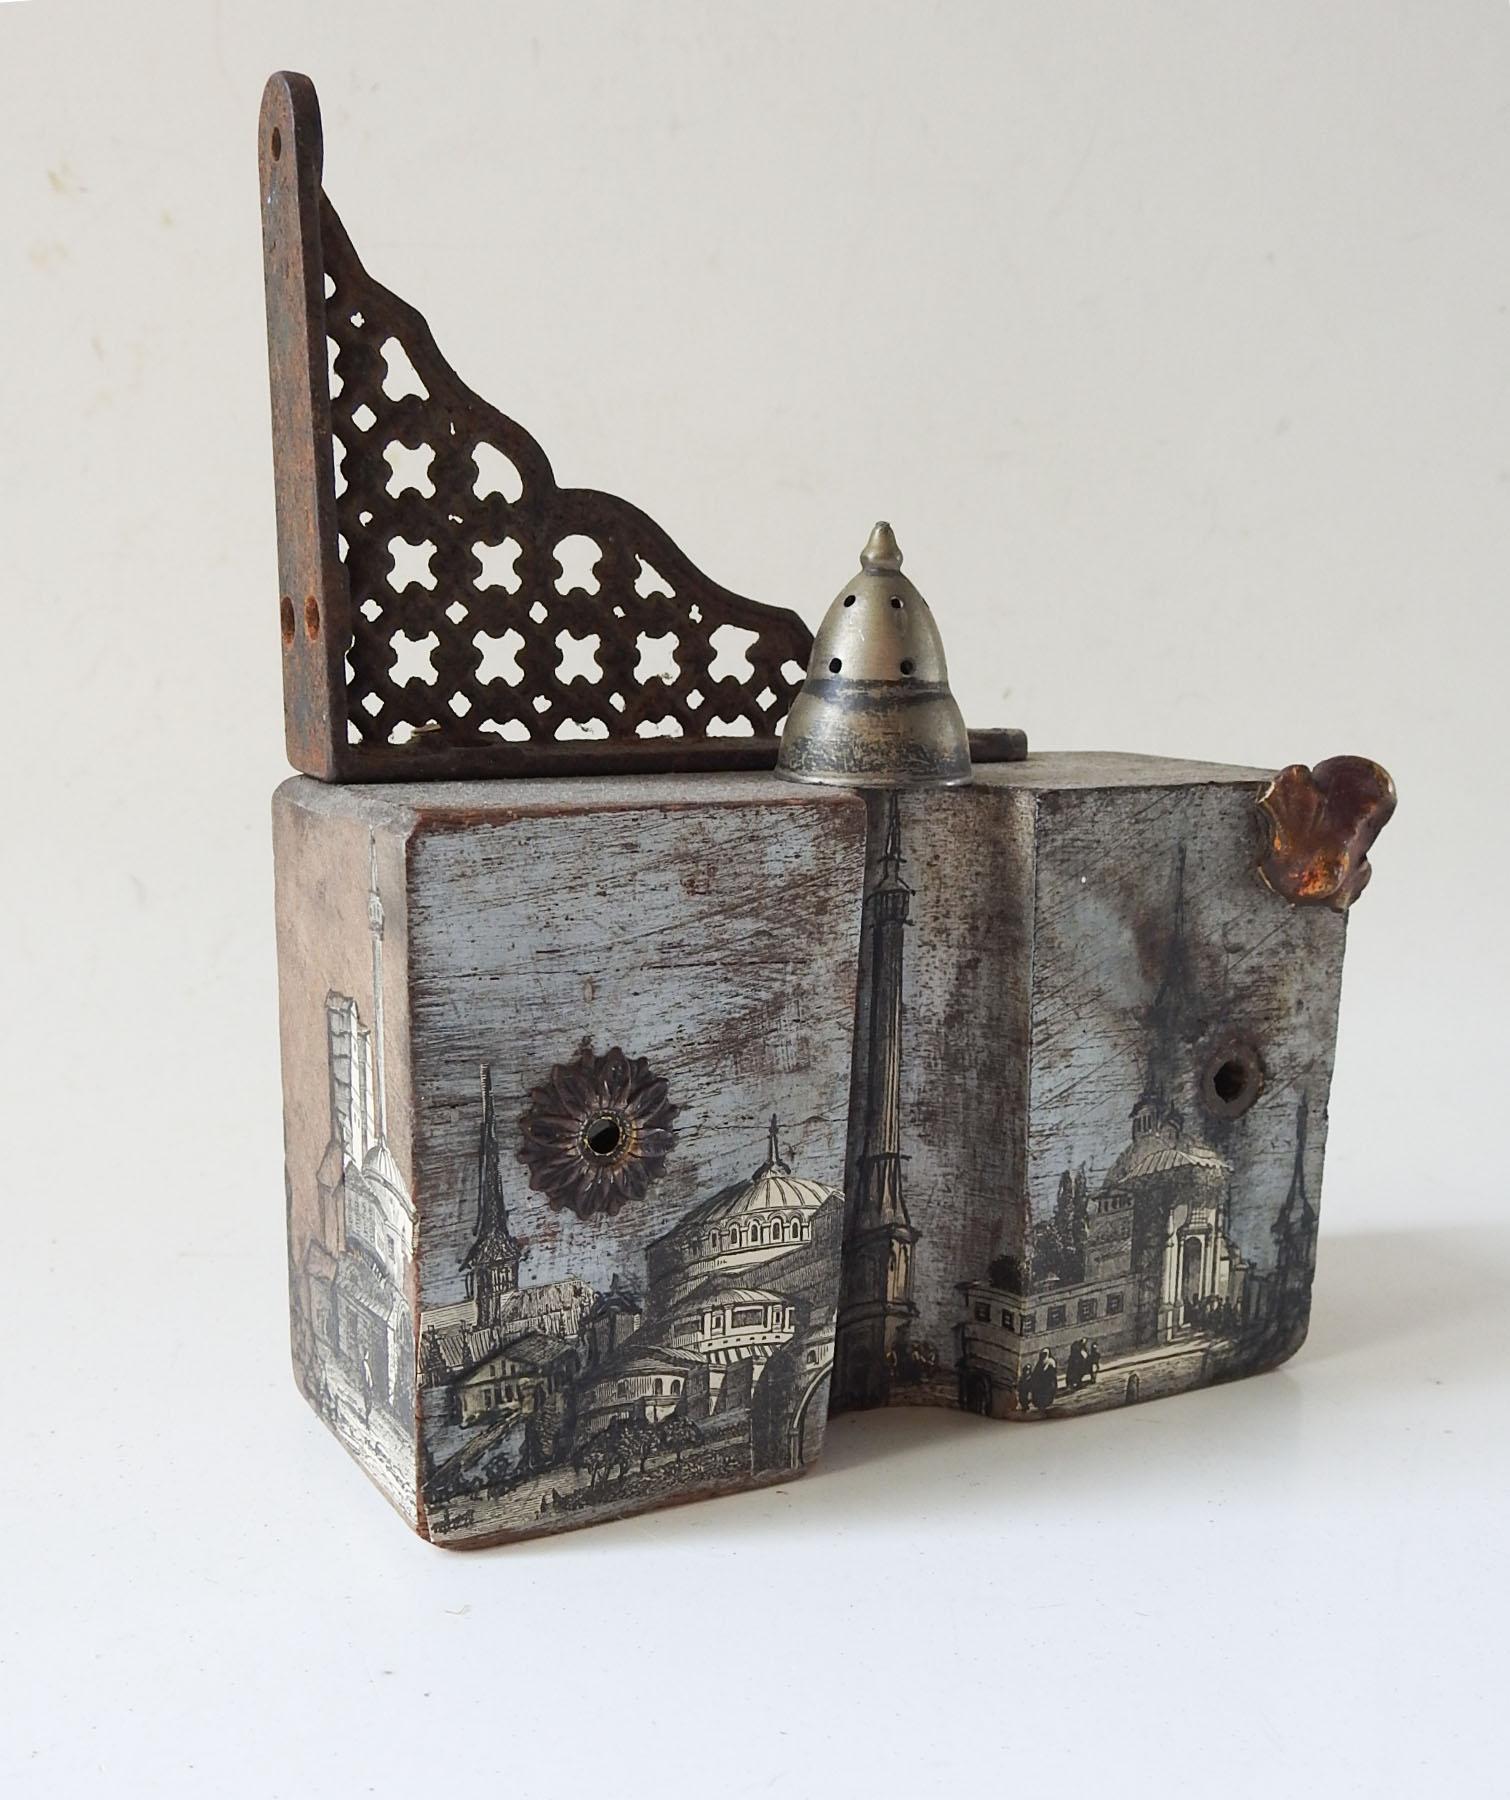 Small tabletop mixed media assemblage sculpture by Linda Thompson. Using all antique and vintage components. Wood casting mold from Alamo Ironworks for Swearingen Co. , antique architectural engravings, brass rosette, silverplate shaker top, cast